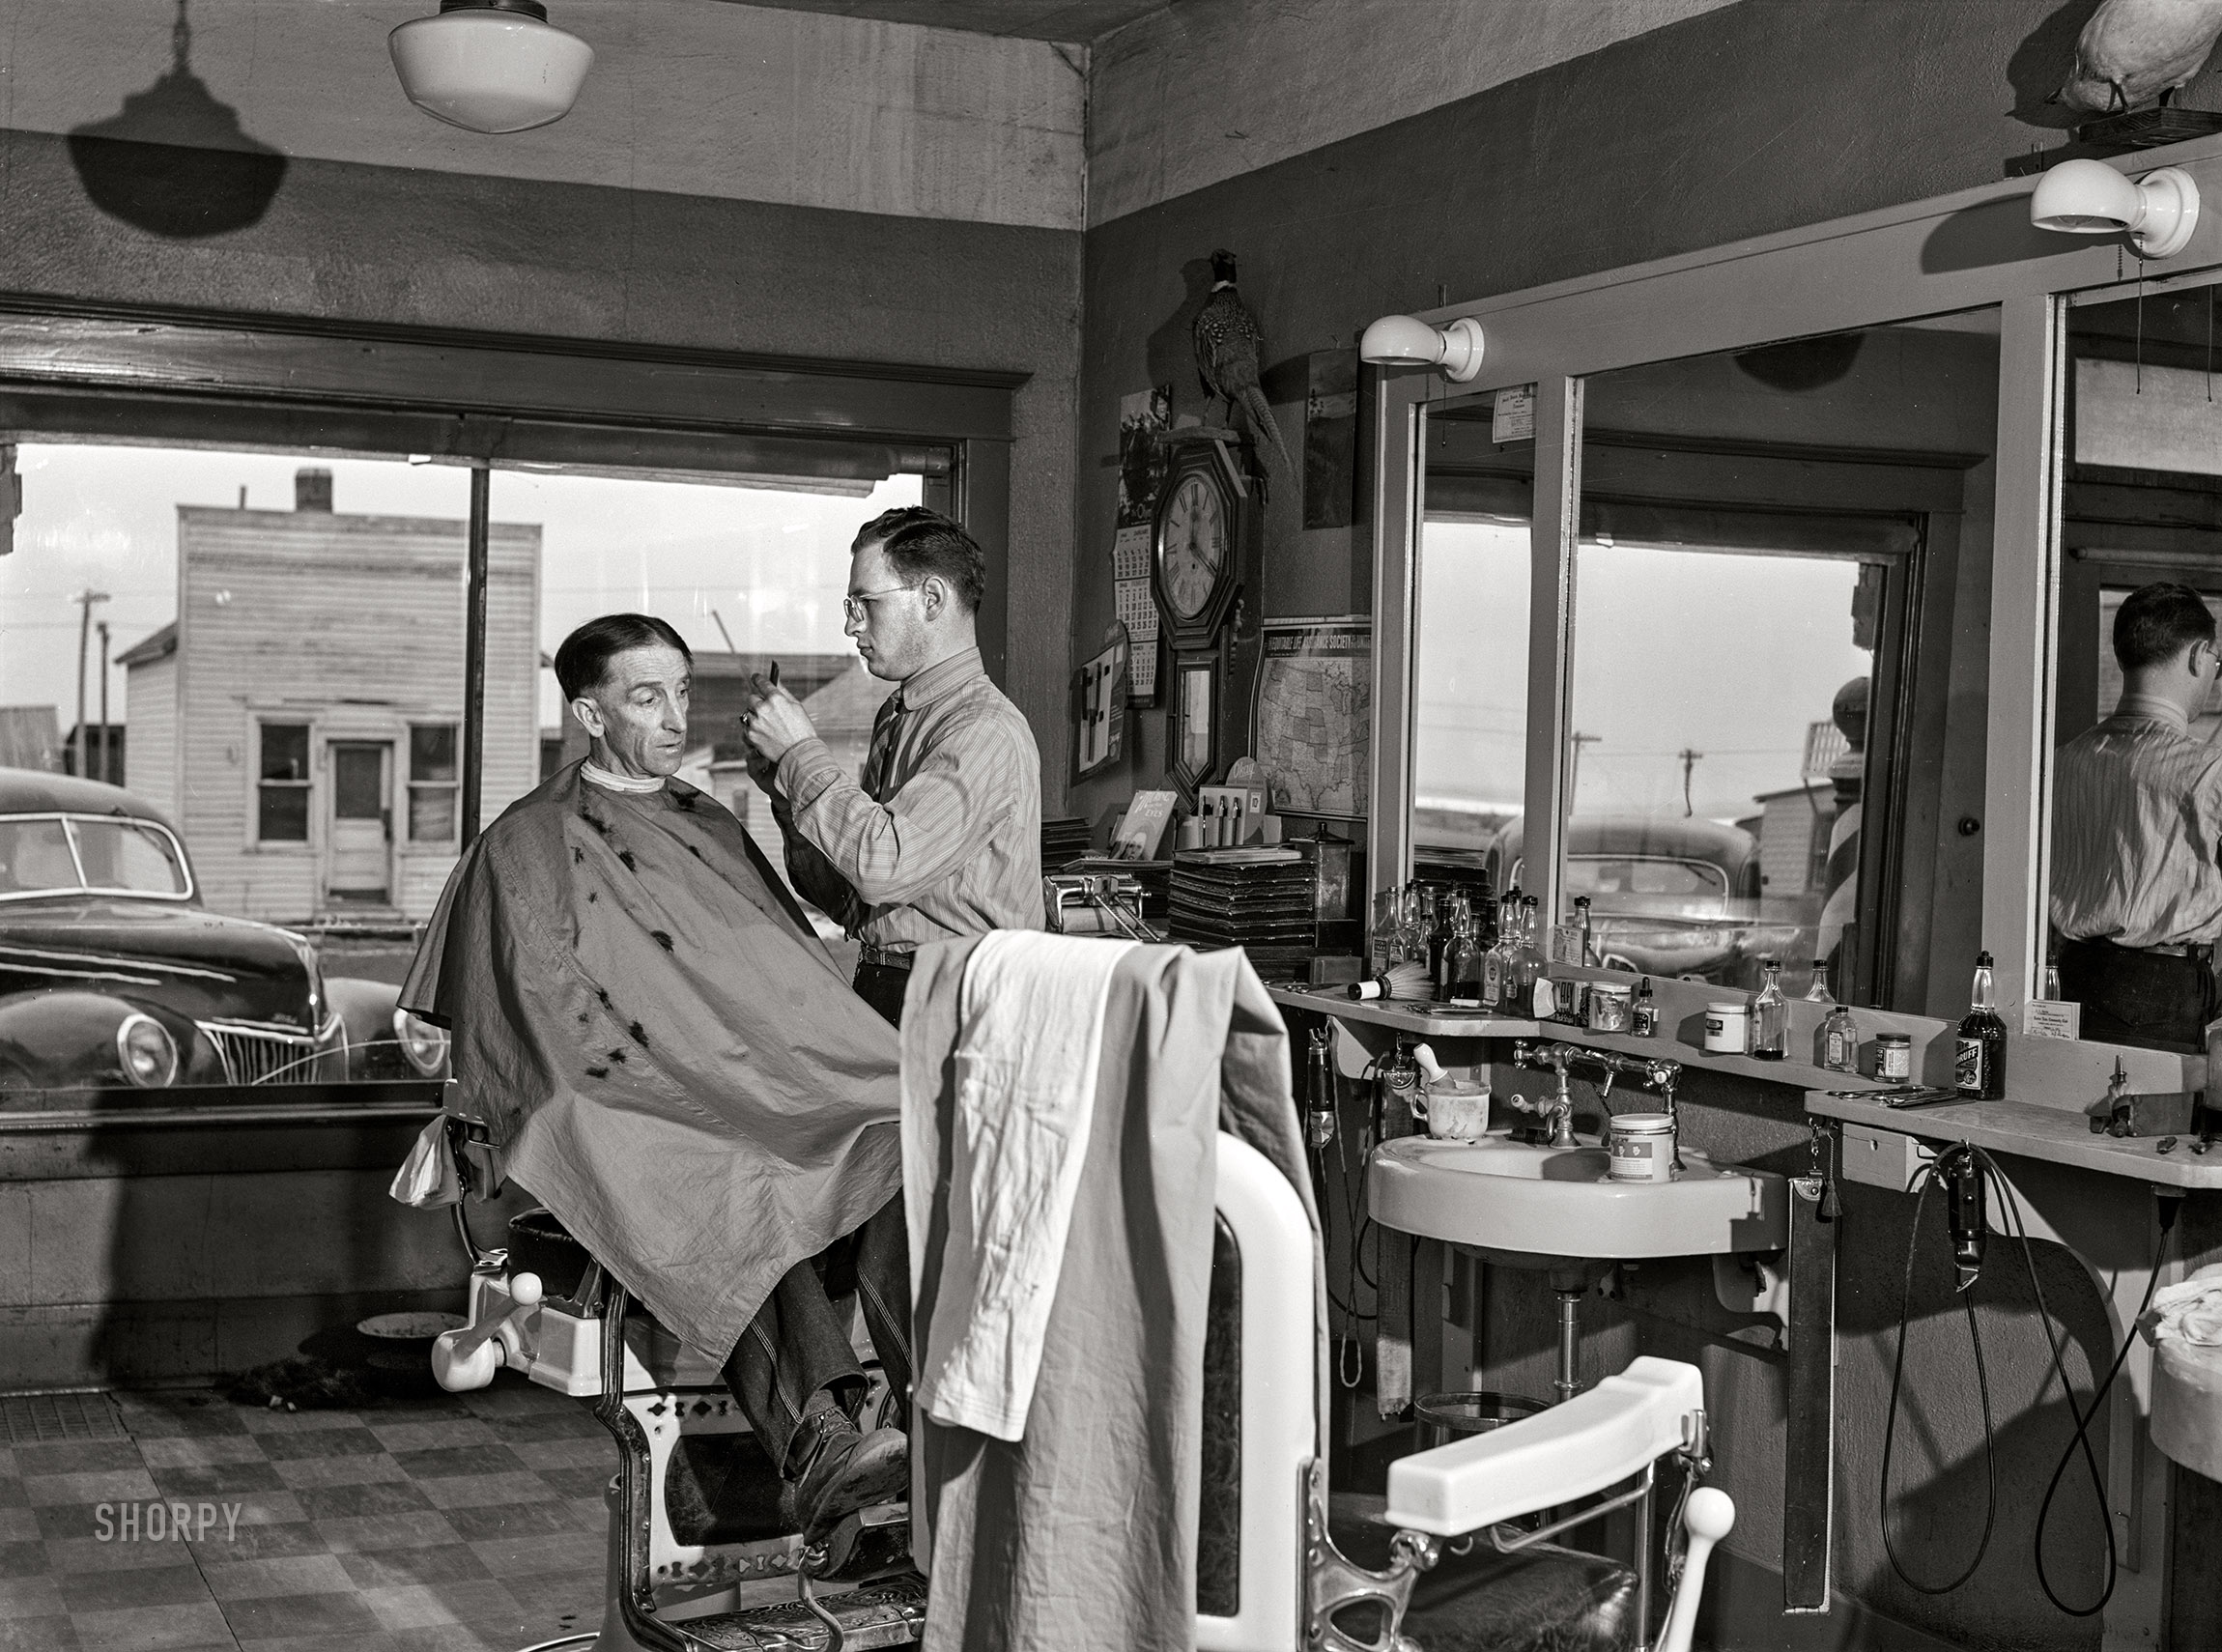 February 1942. "Timber Lake, Dewey County, South Dakota. Barber shop." Medium format acetate negative by John Vachon for the Office of War Information. View full size.
